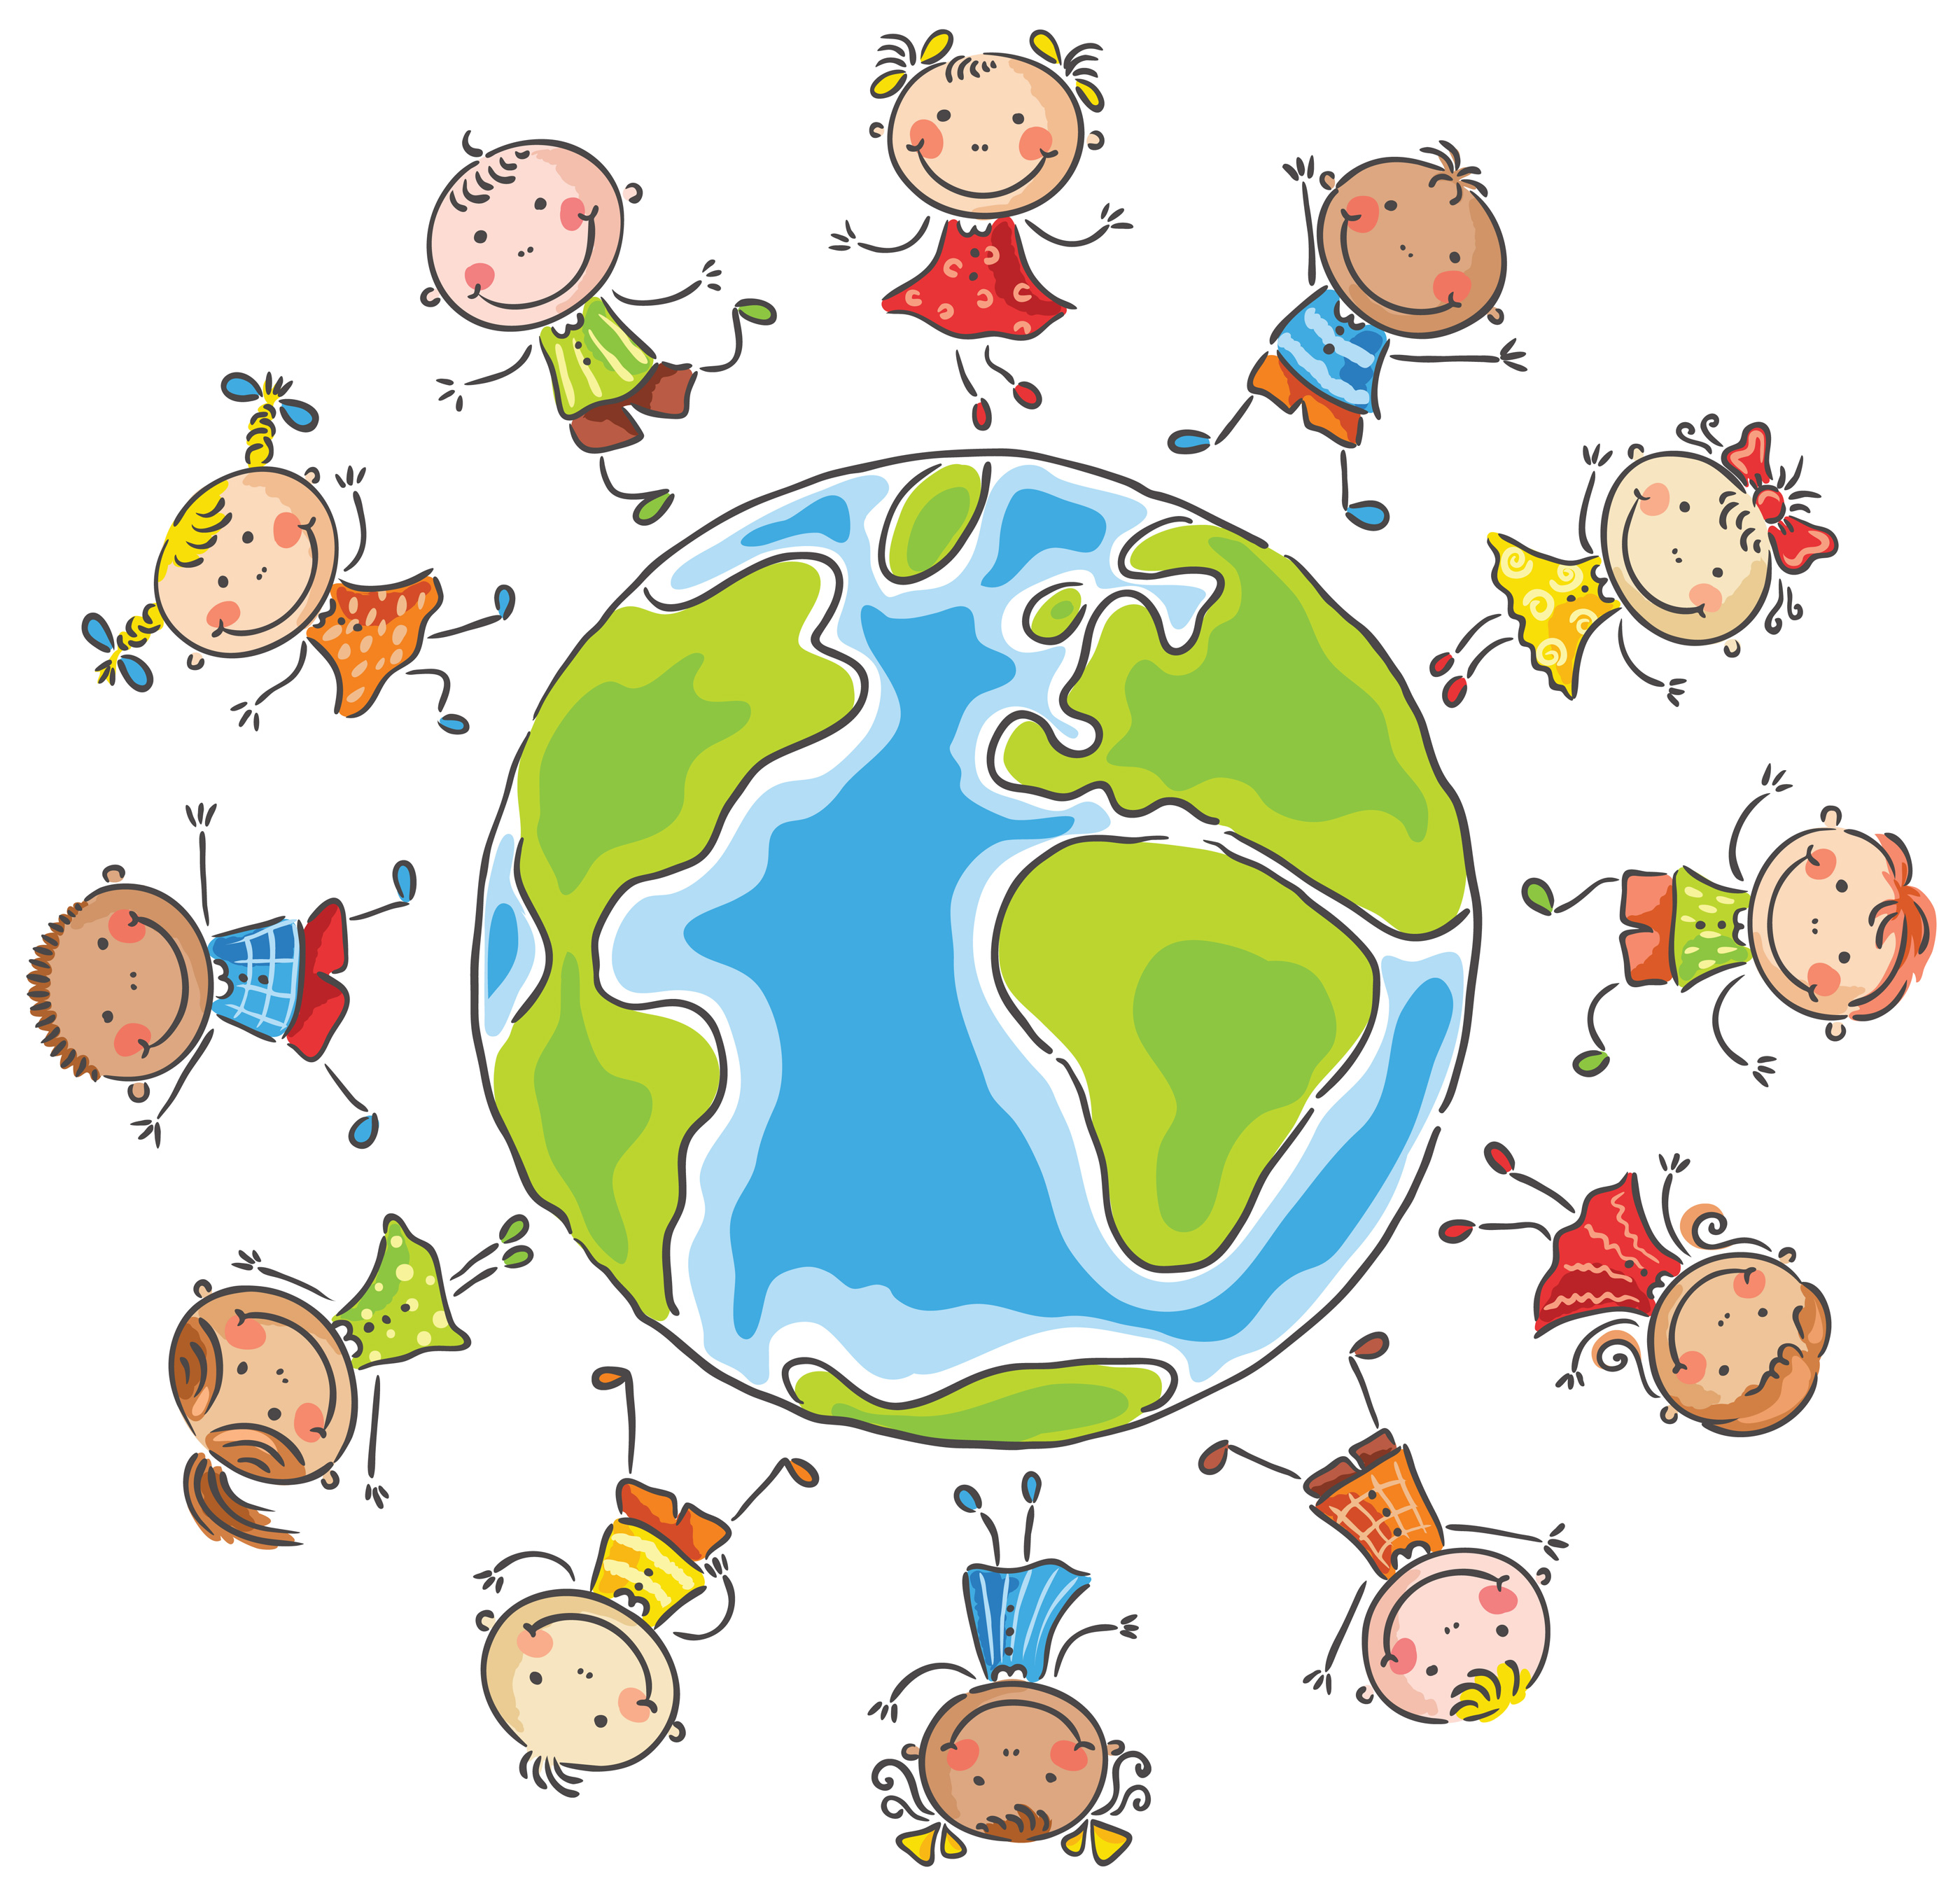 1000  images about Children Around the World on Pinterest | Around the worlds, Social studies projects and World globes